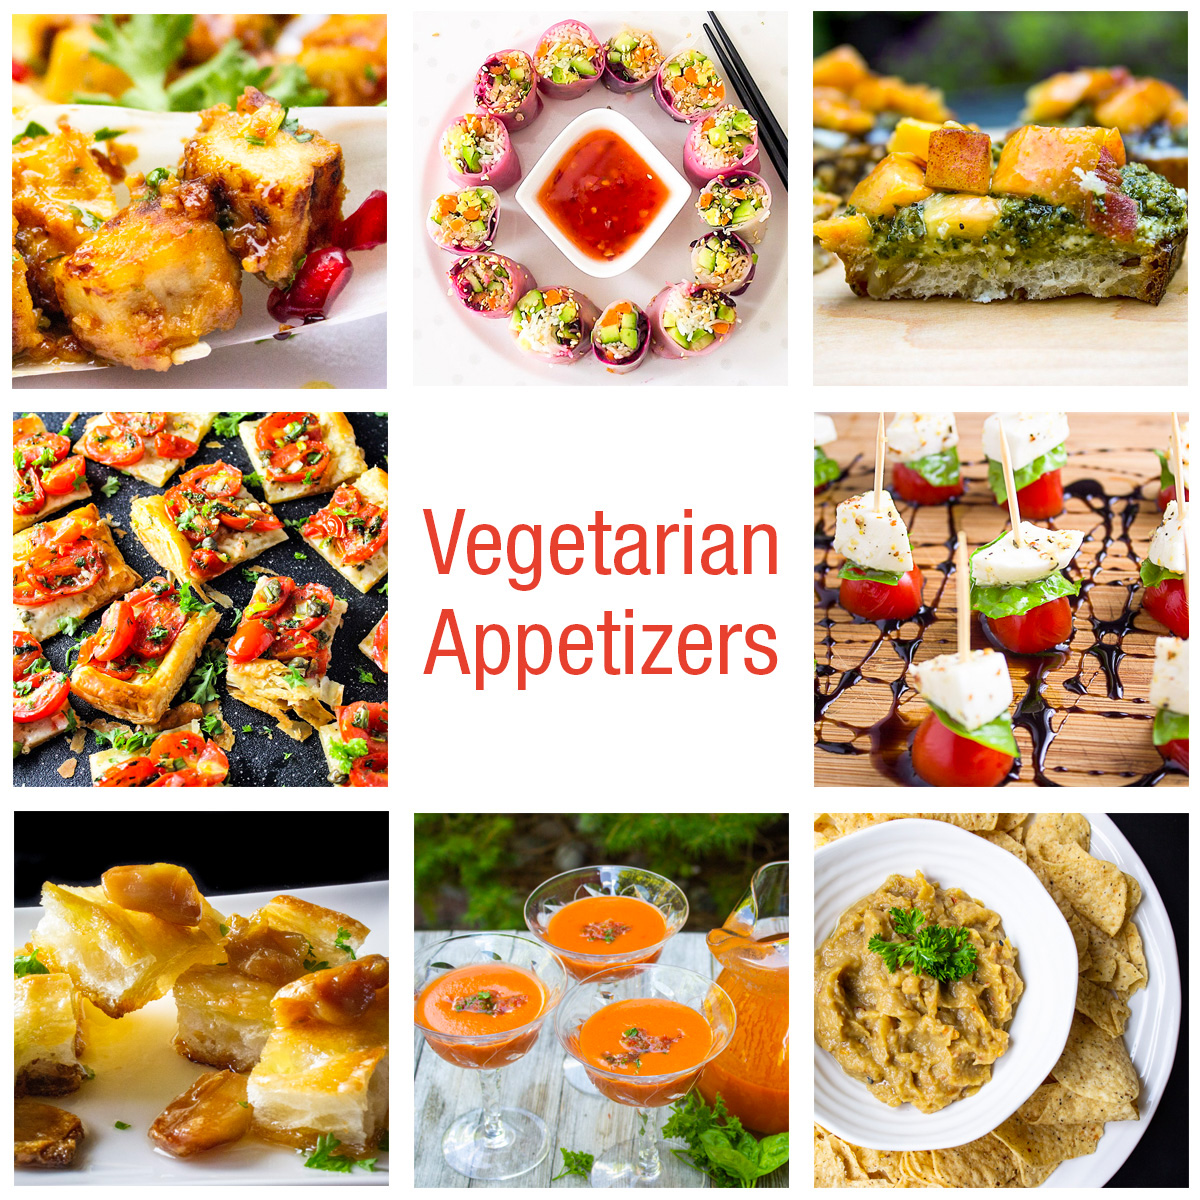 20 Vegetarian Appetizers (and serving tips)